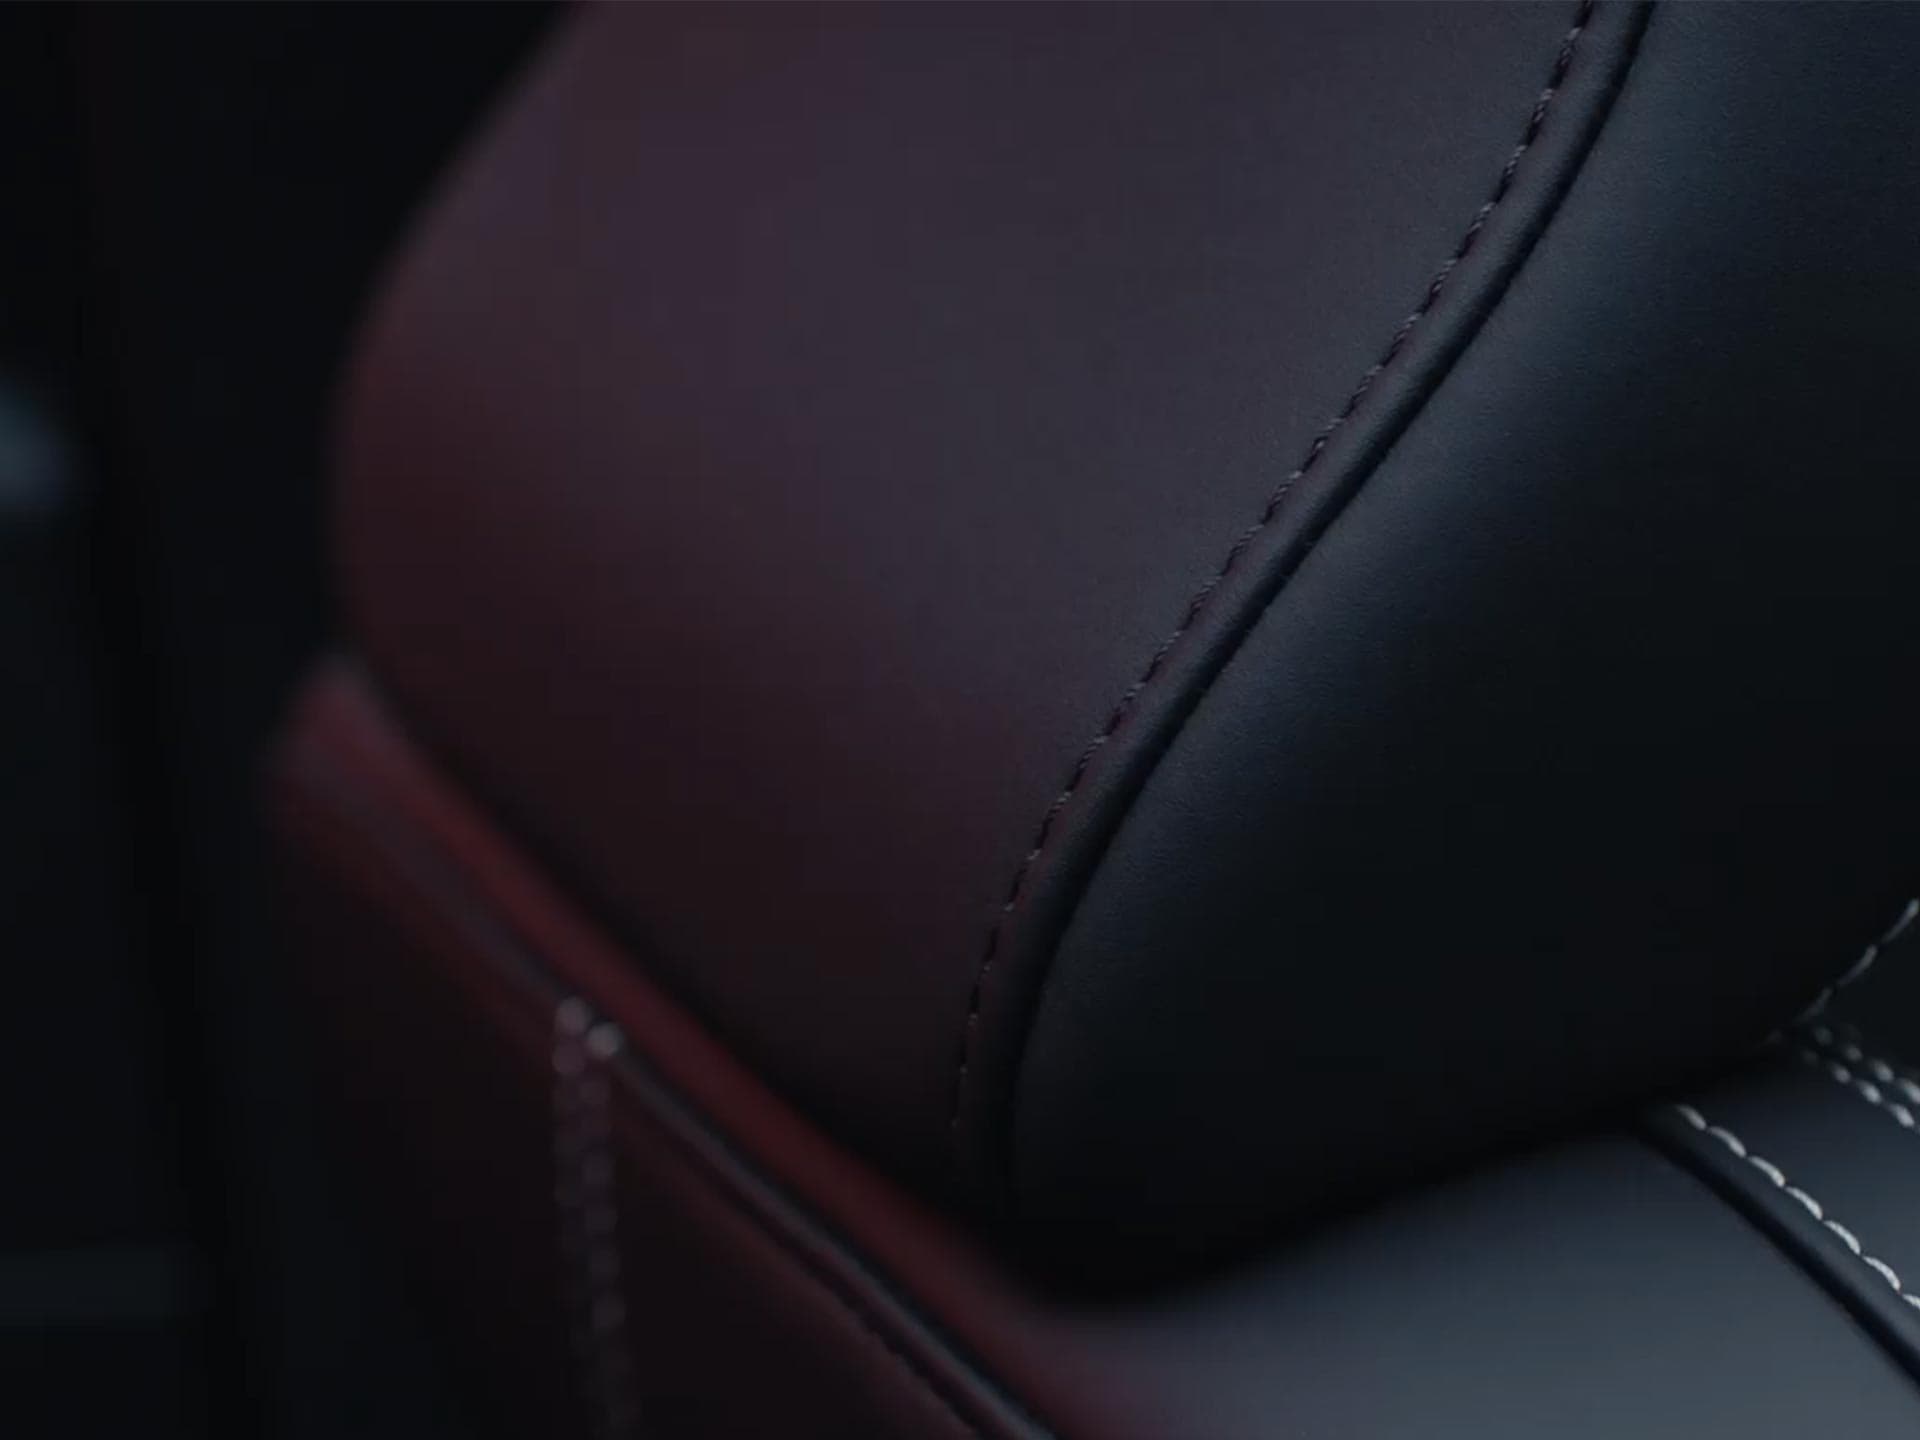 Leather free interior of the Volvo C40 Recharge.